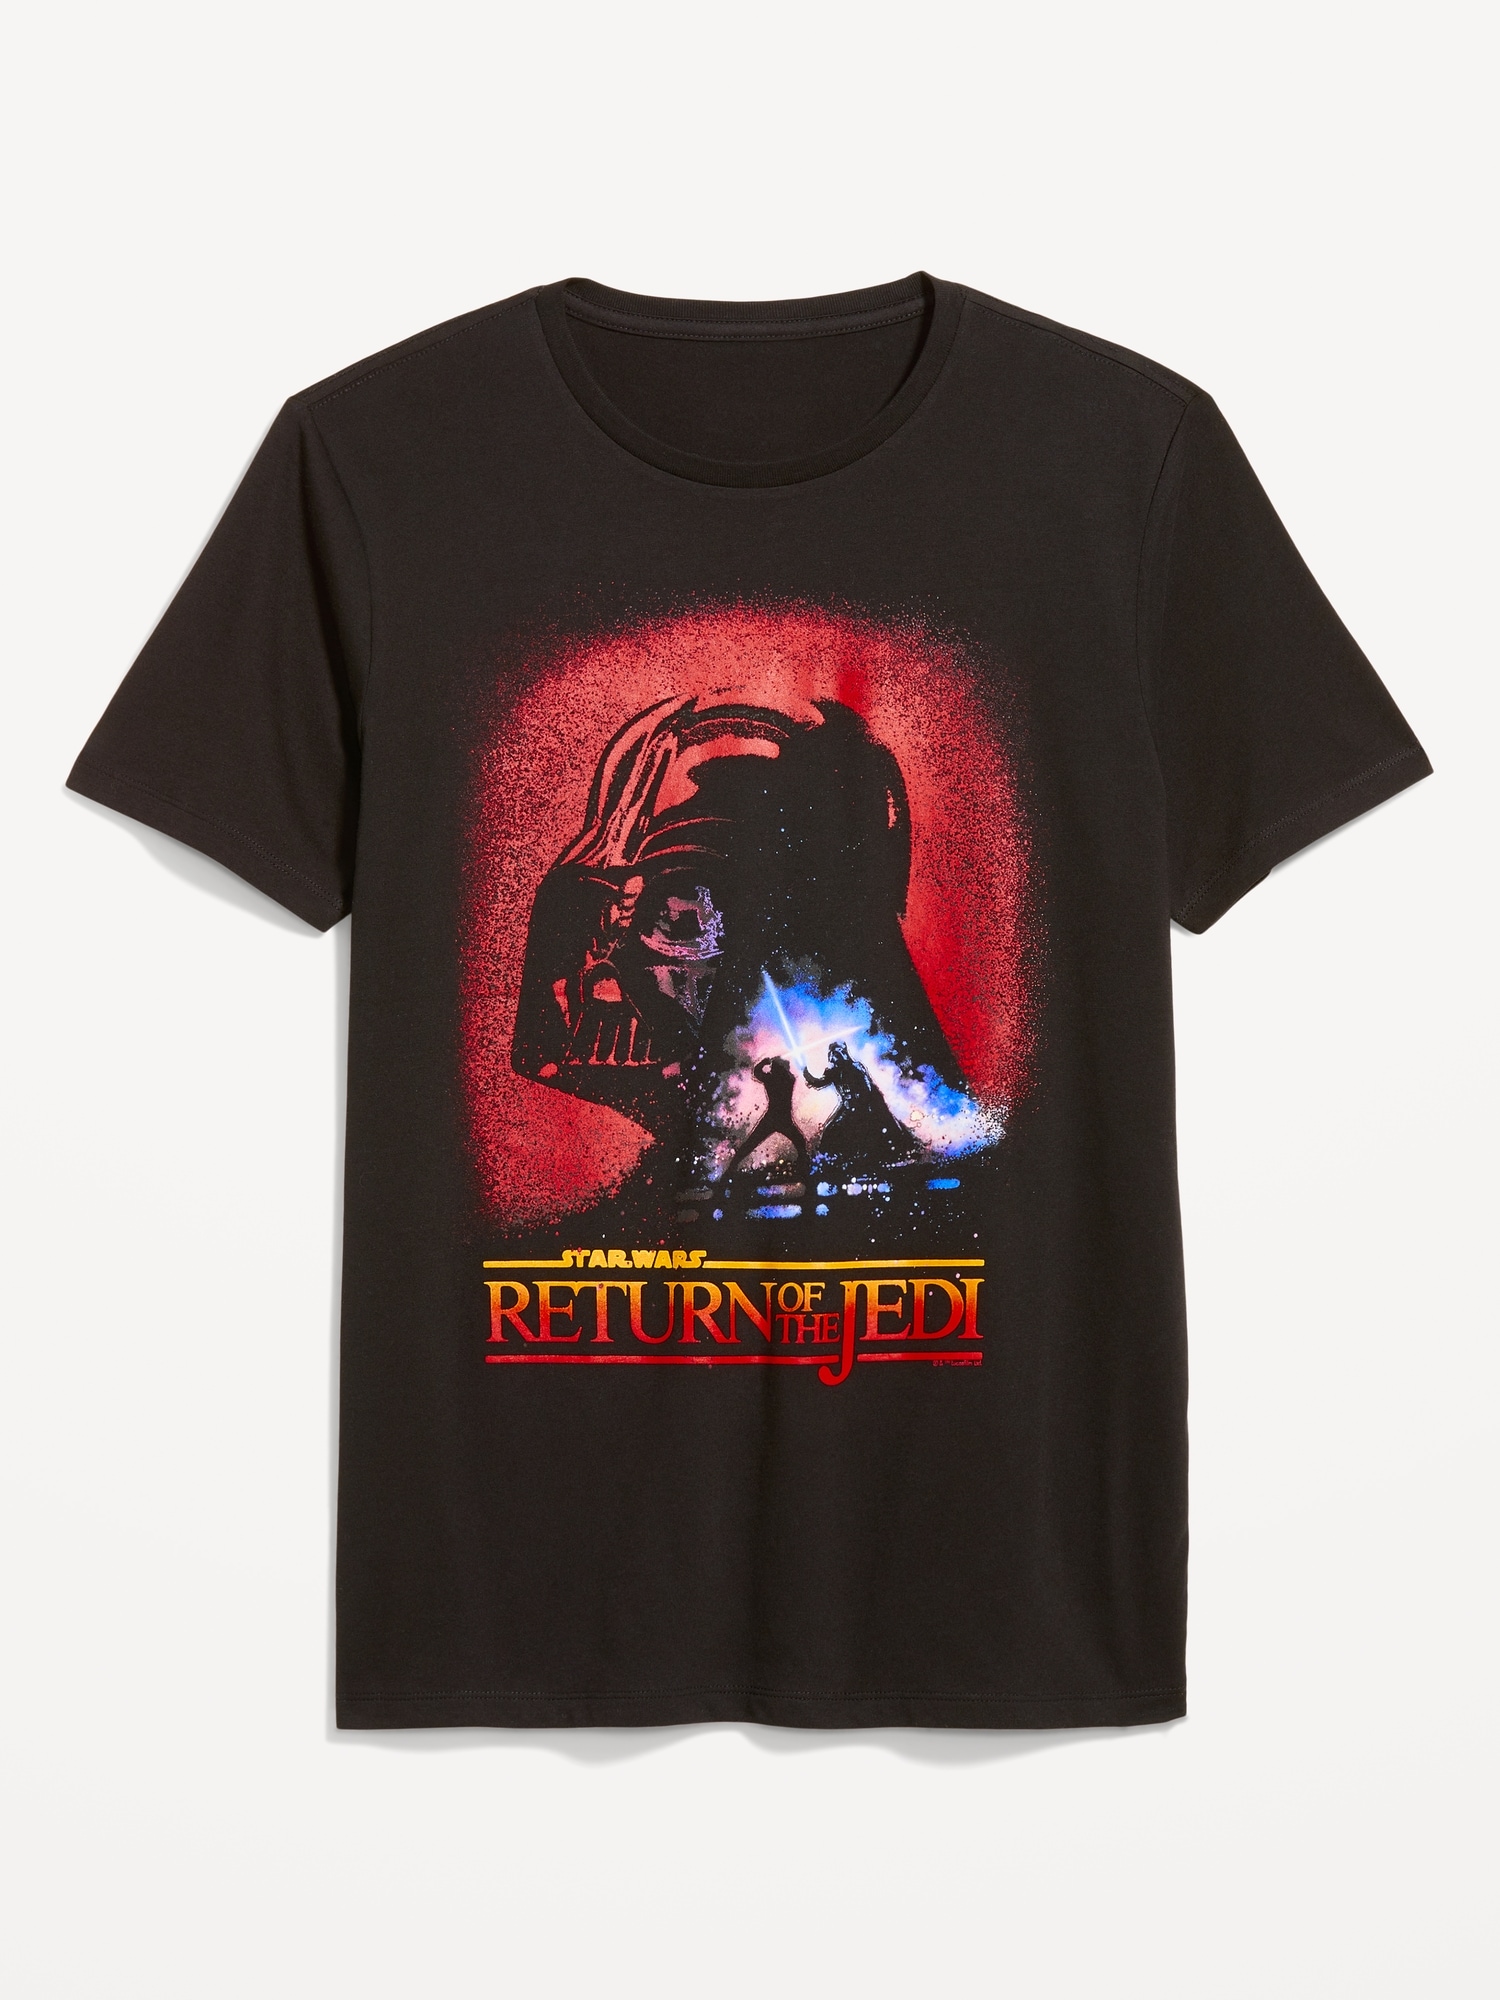 Star Wars™ "Return of the Jedi" Gender-Neutral T-Shirt for Adults